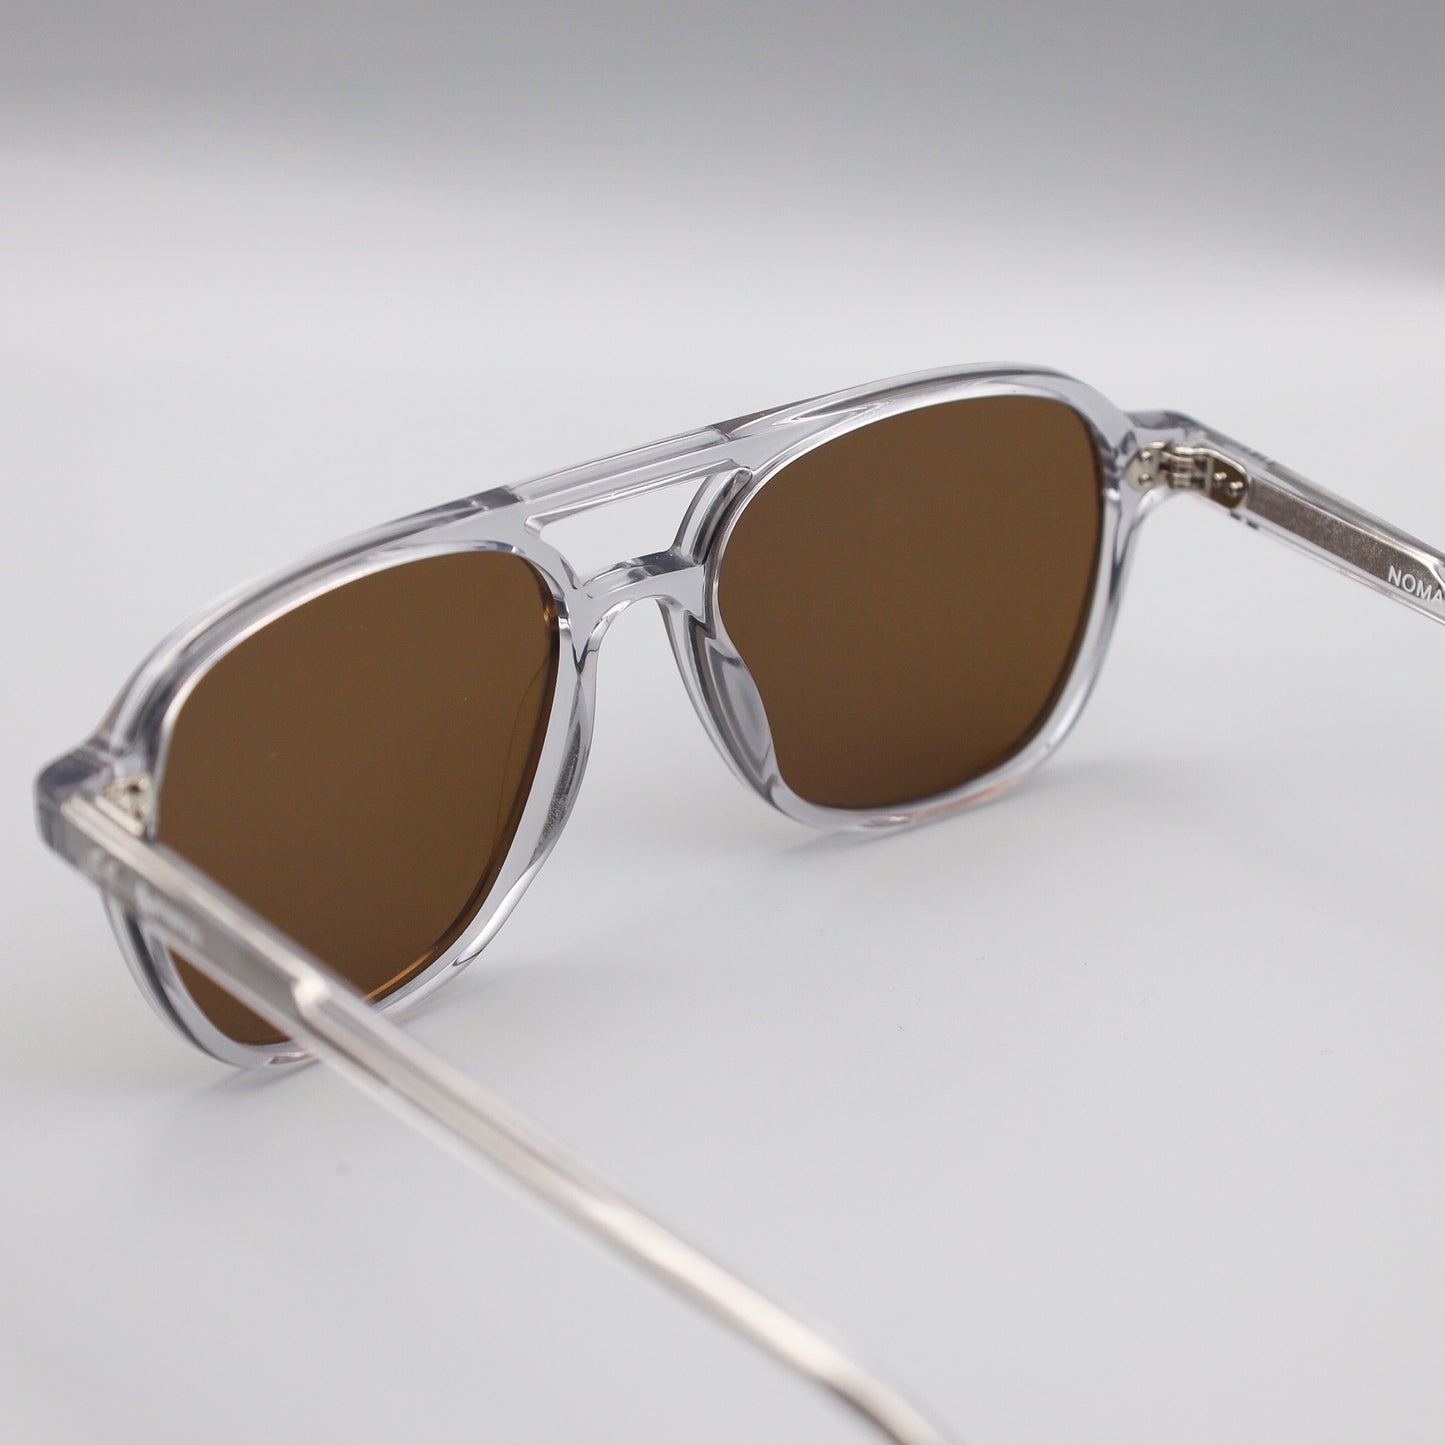 Nomad Clear Brown Sunglasses